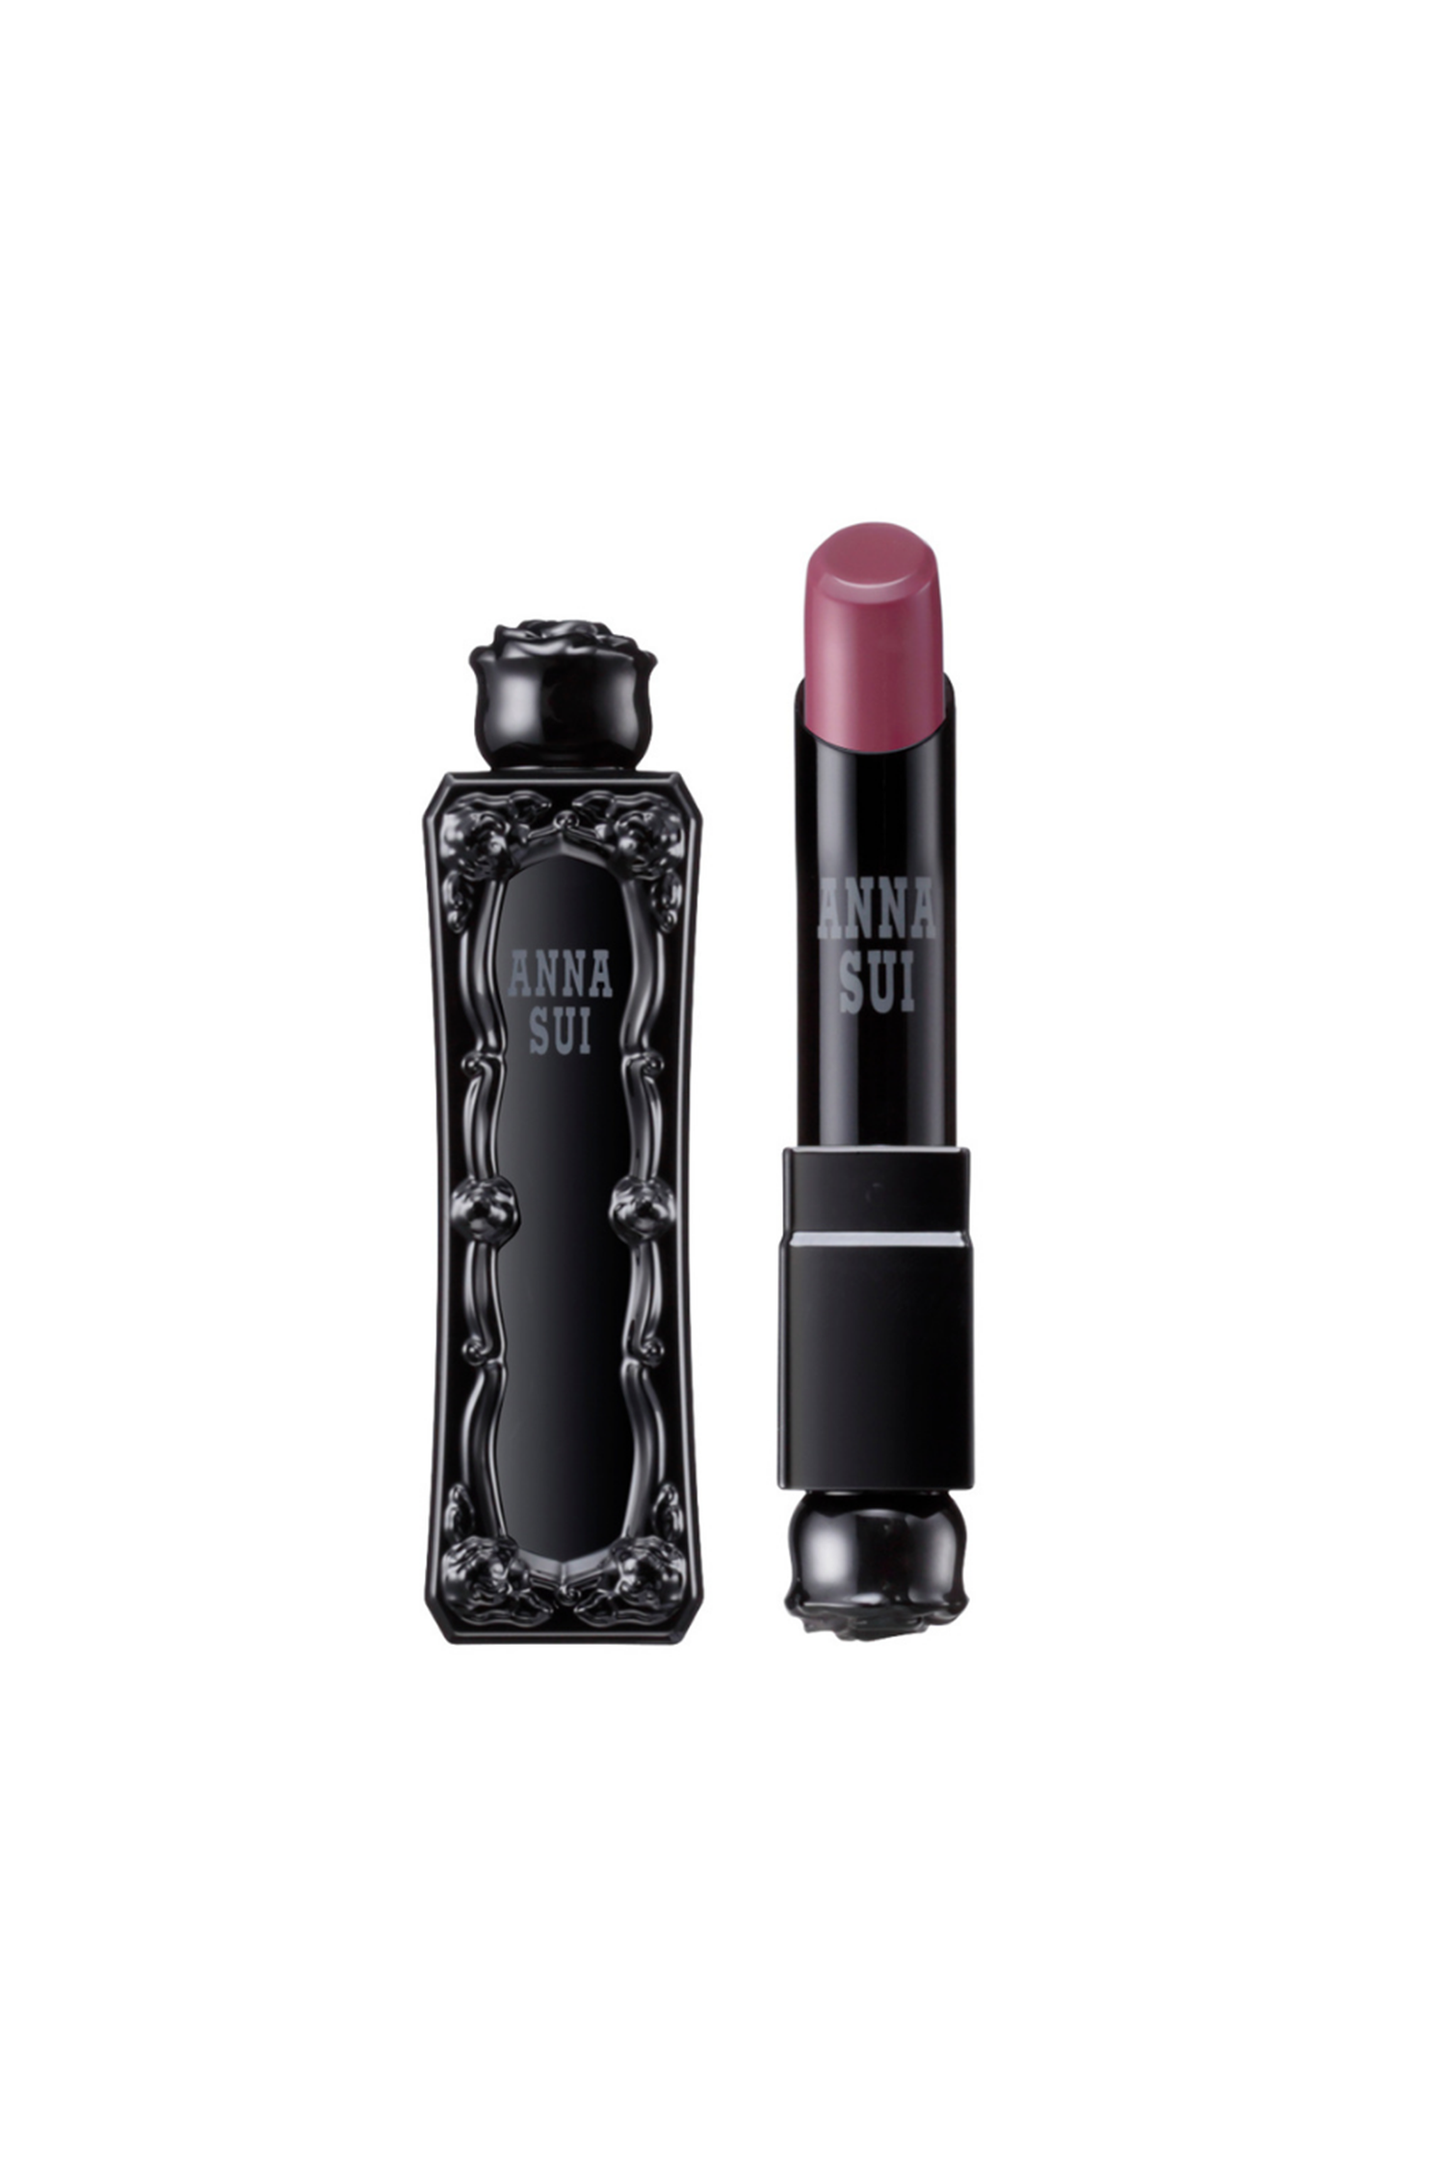 Plum lipstick, in an Anna Sui, black container with raised rose pattern, rose on top 